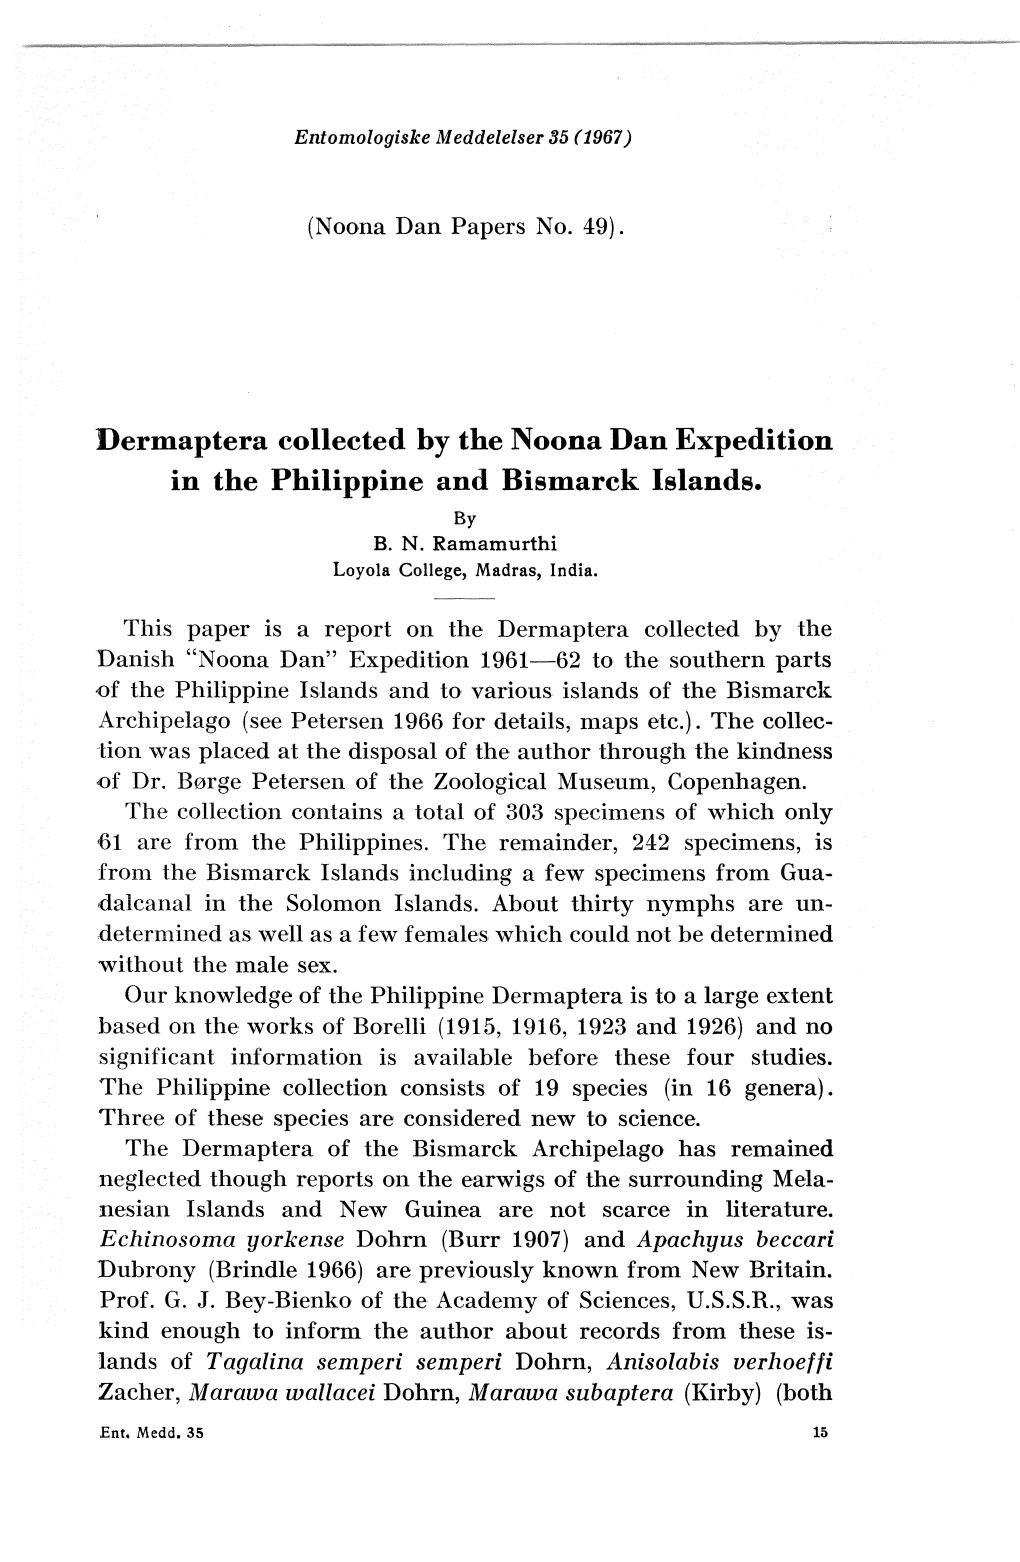 Dermaptera Collected by the Noona Dan Expedition in the Philippine and Bismarck Islands. by B